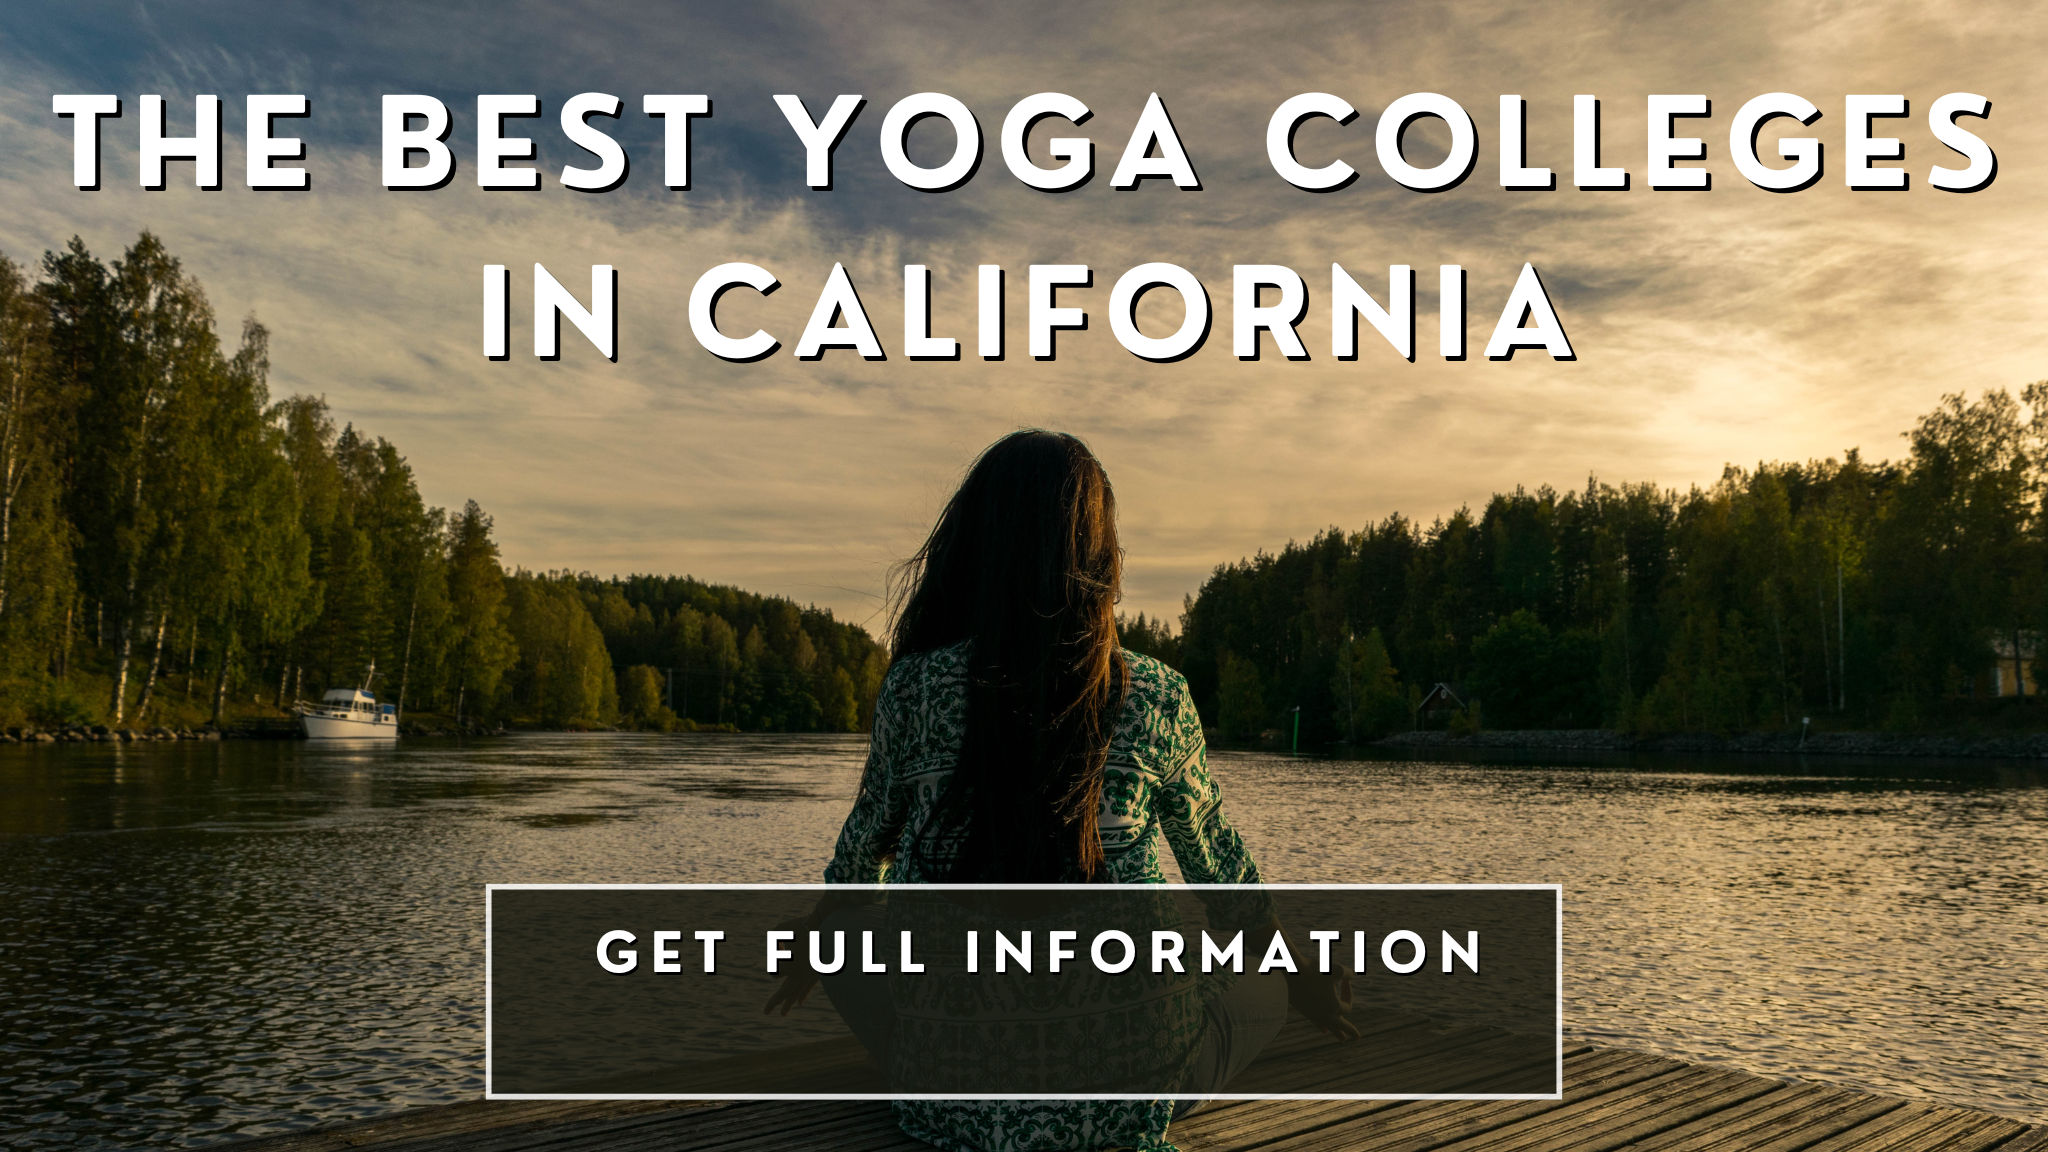 The Best Yoga Colleges in California